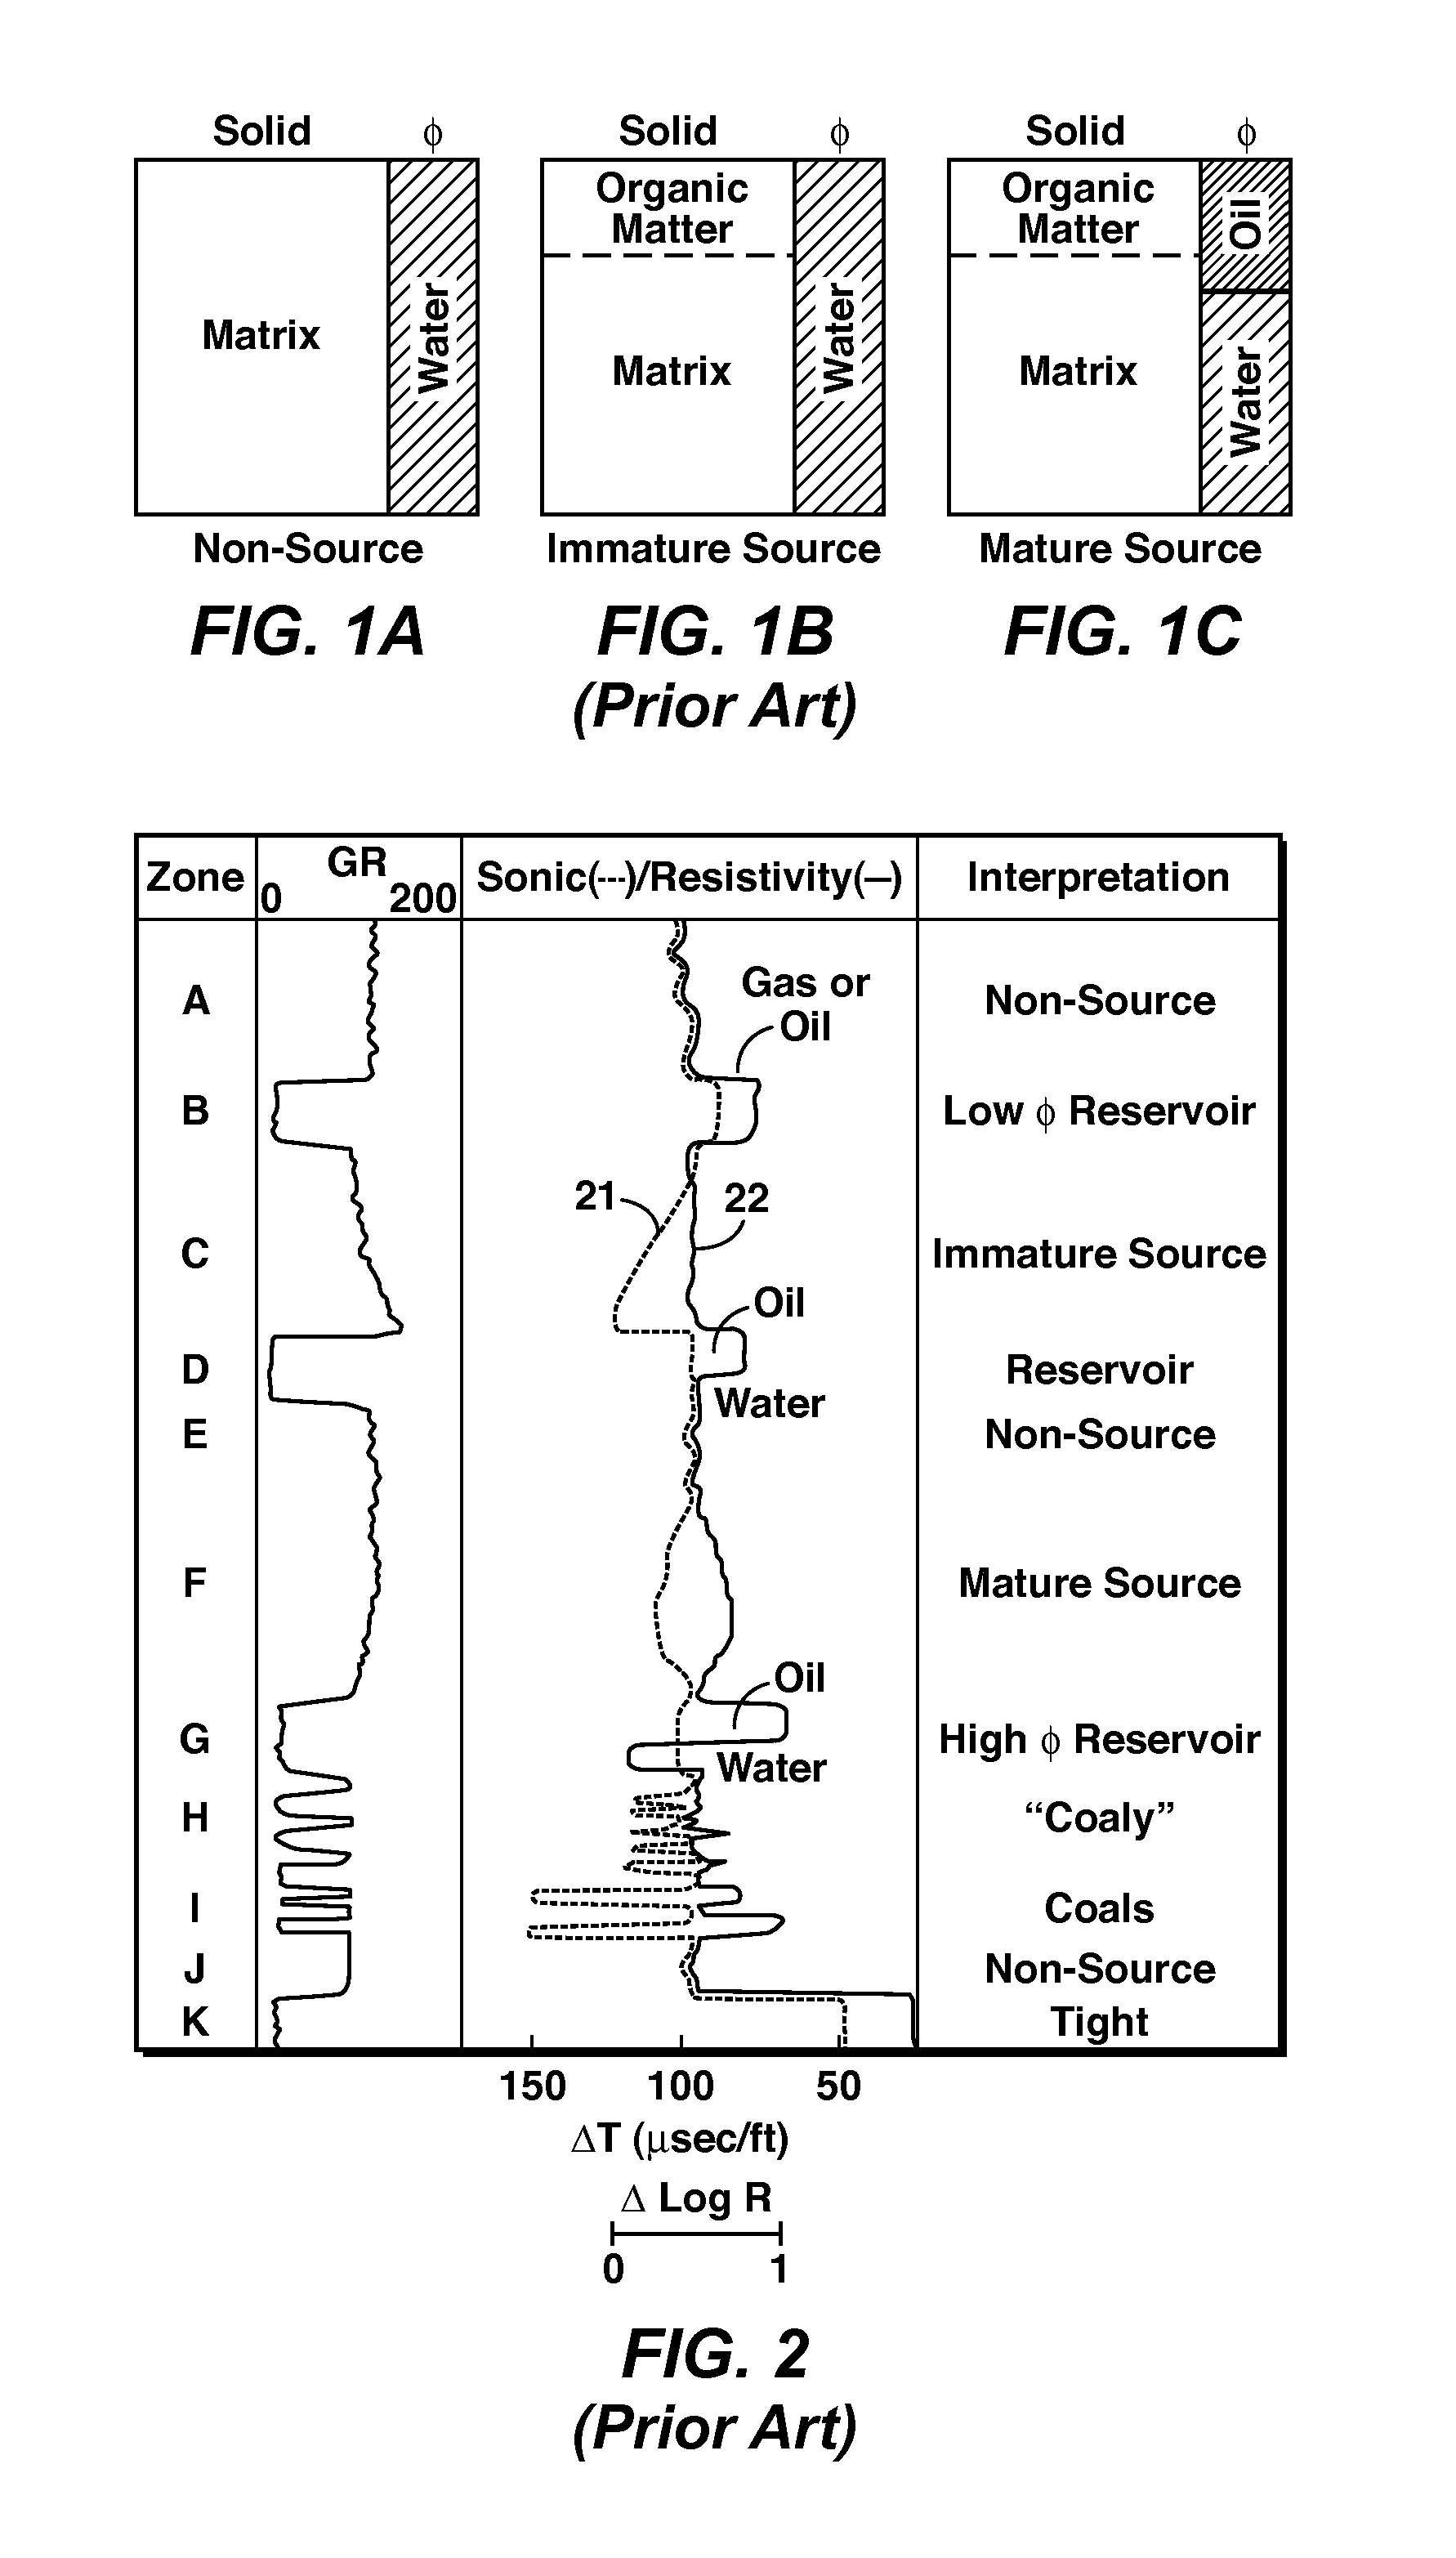 Method for remote identification and characterization of hydrocarbon source rocks using seismic and electromagnetic geophysical data